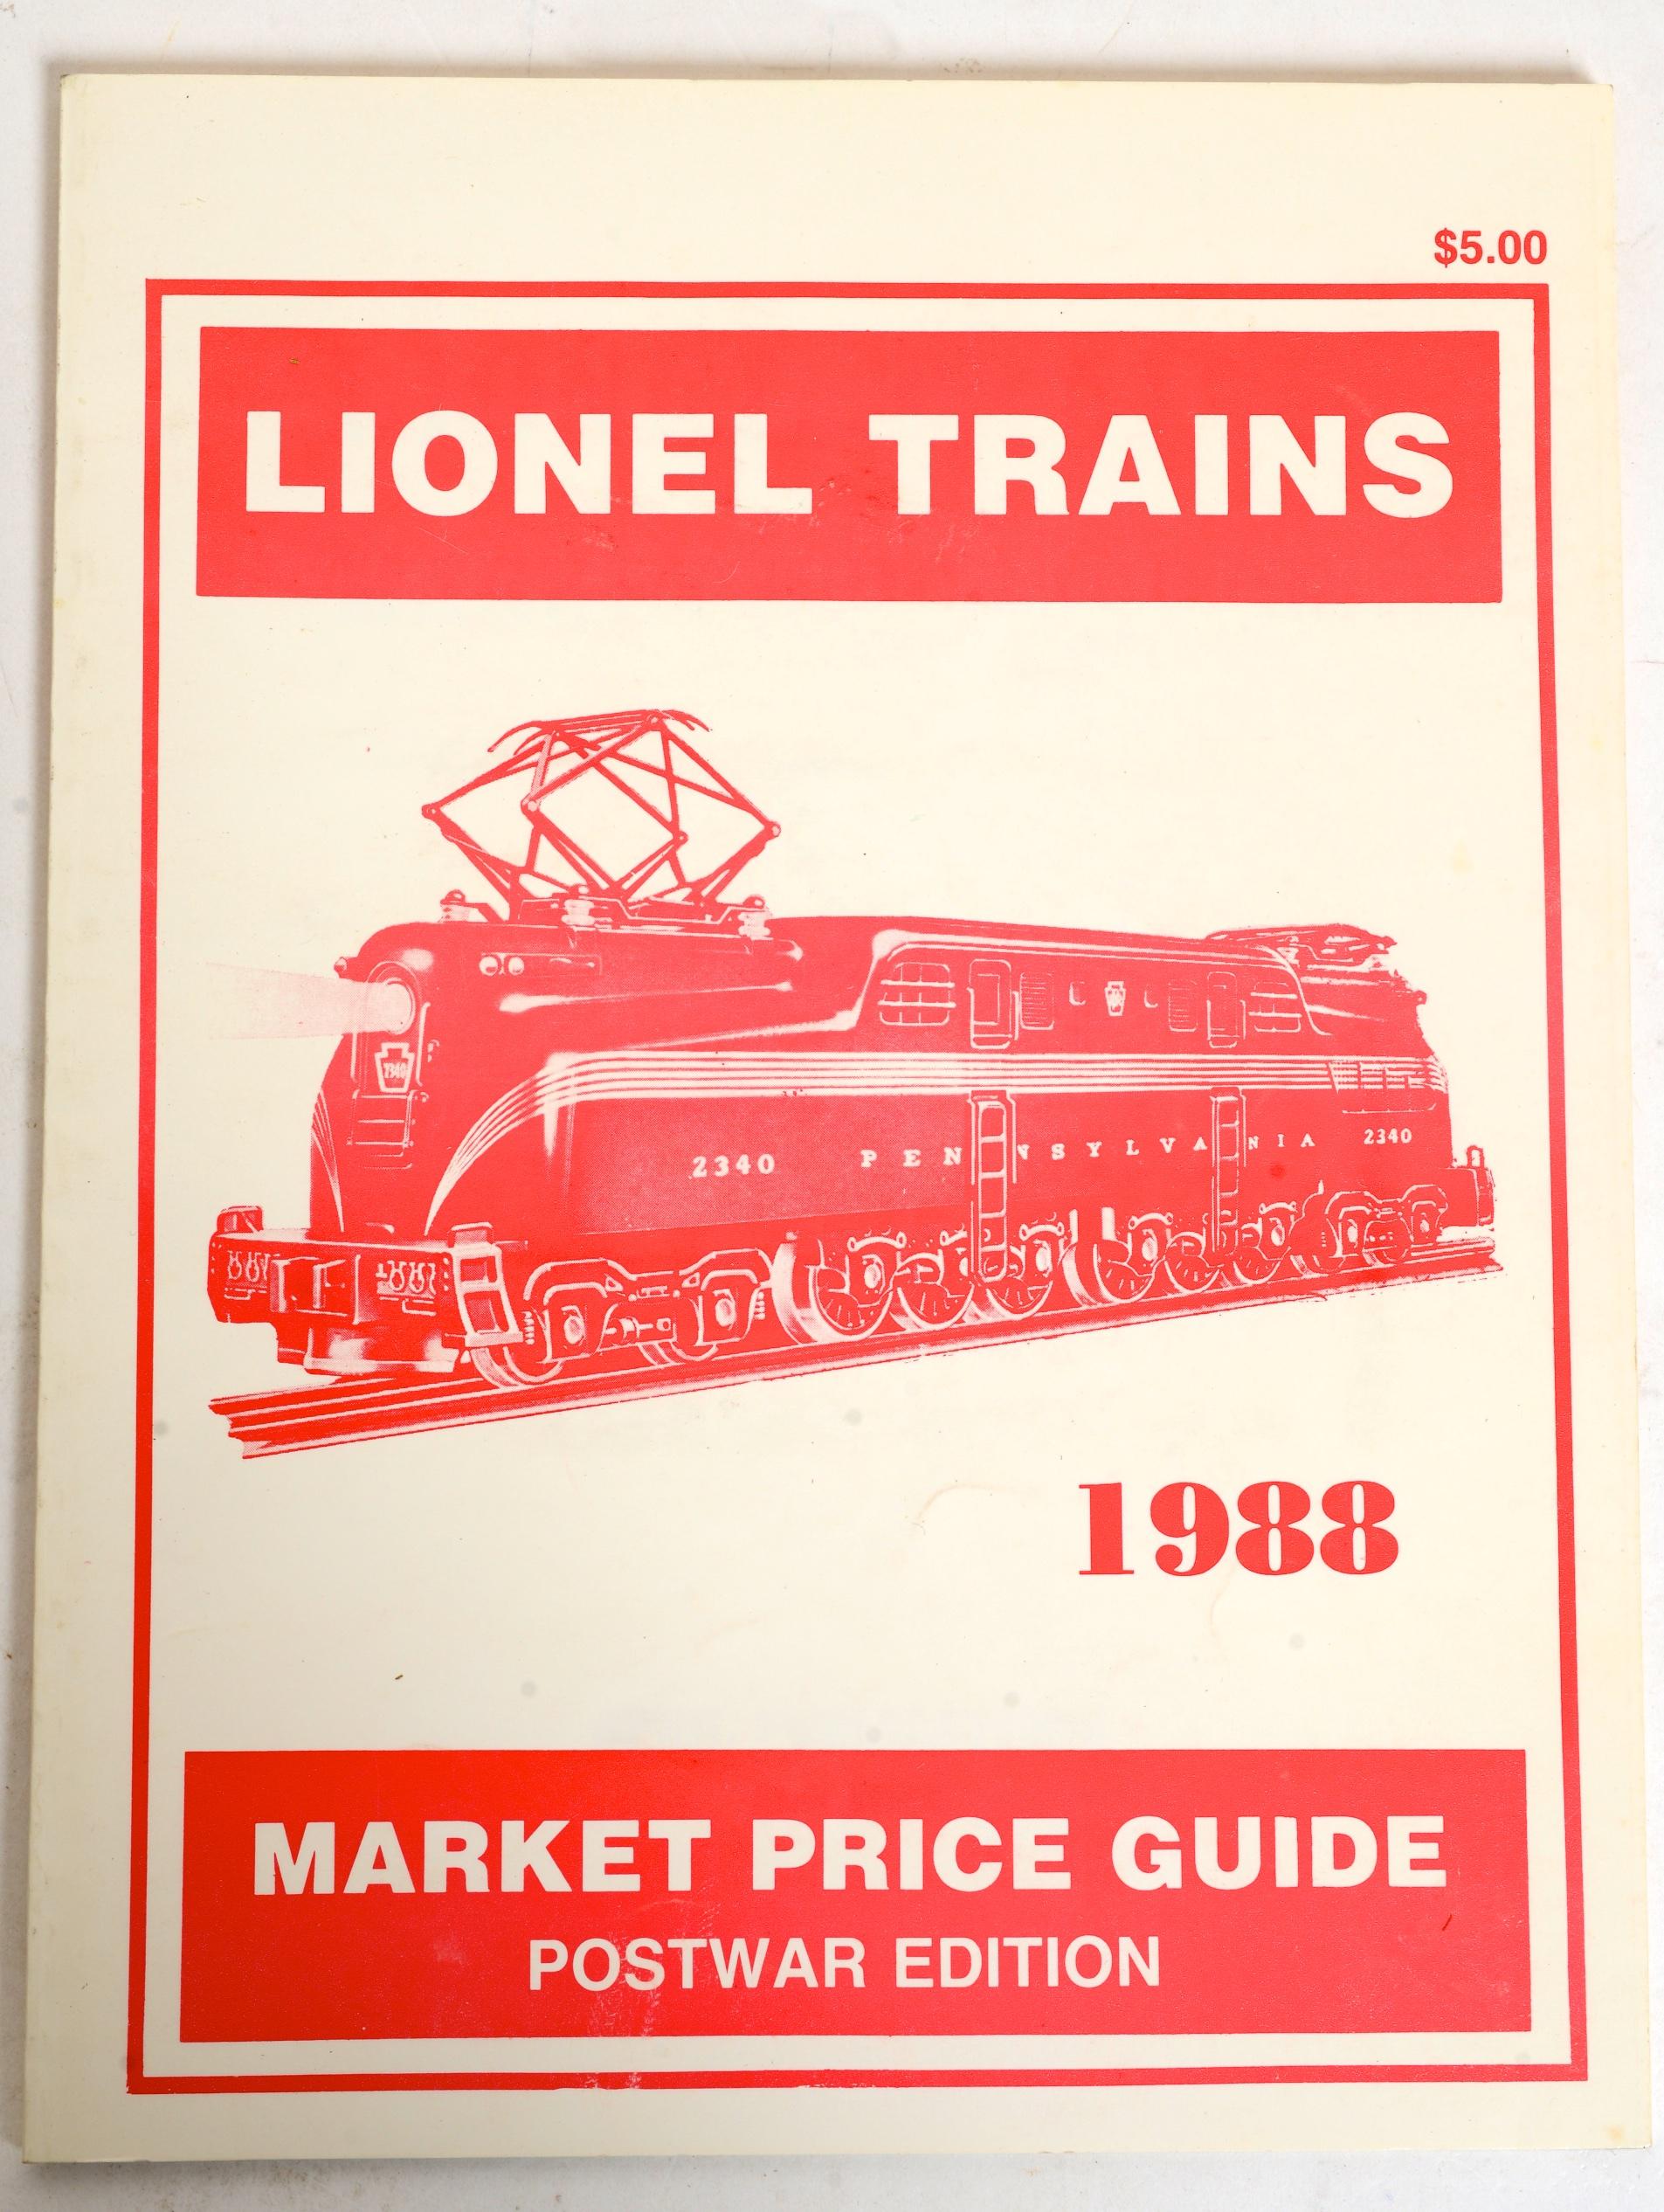 Set of Six 1st Ed, Limited Ed and Signed Books on Lionel Toy Trains. 1. Greenberg's Guide to Lionel Trains by Bruce C. Greenberg, 1945-1969. Sykesville: Greenberg Publishing Company, 1987. Sixth edition paper back. 232 pp. 2. Greenberg's Guide to